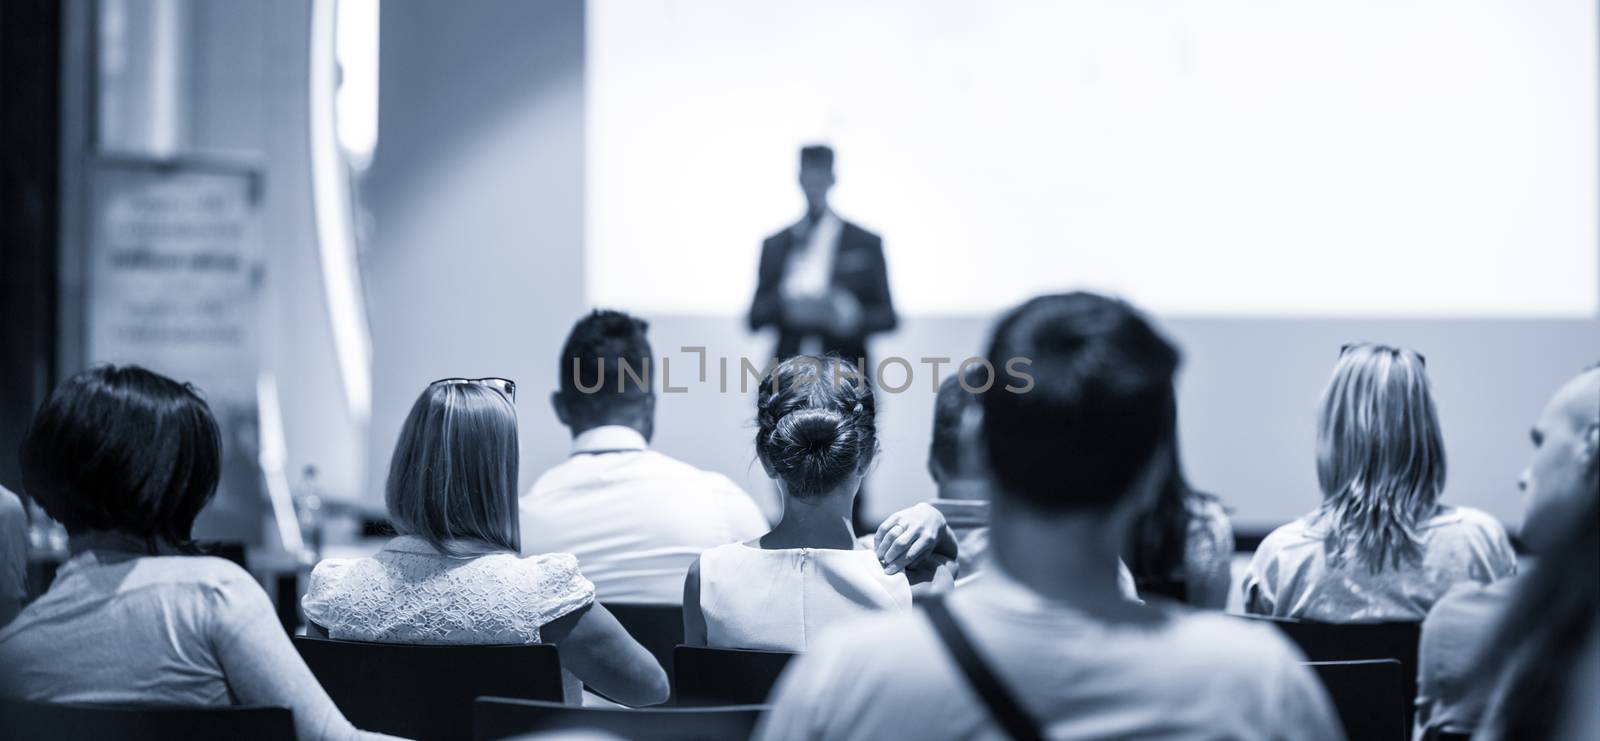 Speaker giving talk at business event. Audience at the conference hall. Business and Entrepreneurship concept. Focus on unrecognizable people in audience. Blue toned grayscale image.